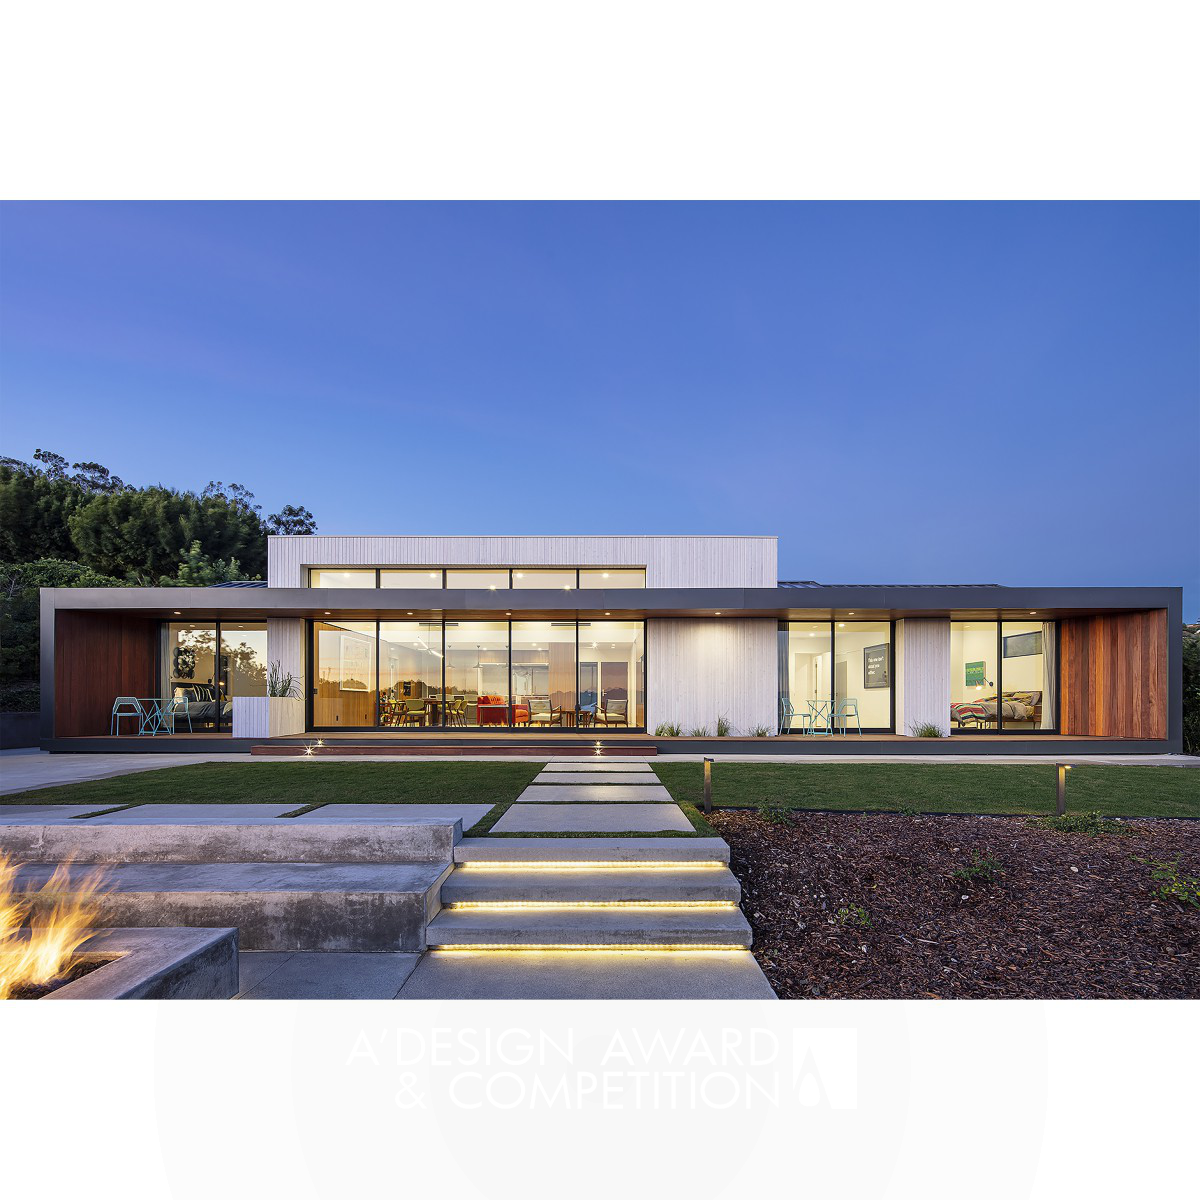 Colega Architects wins Golden at the prestigious A' Architecture, Building and Structure Design Award with Crestridge Residence Single Family Home.